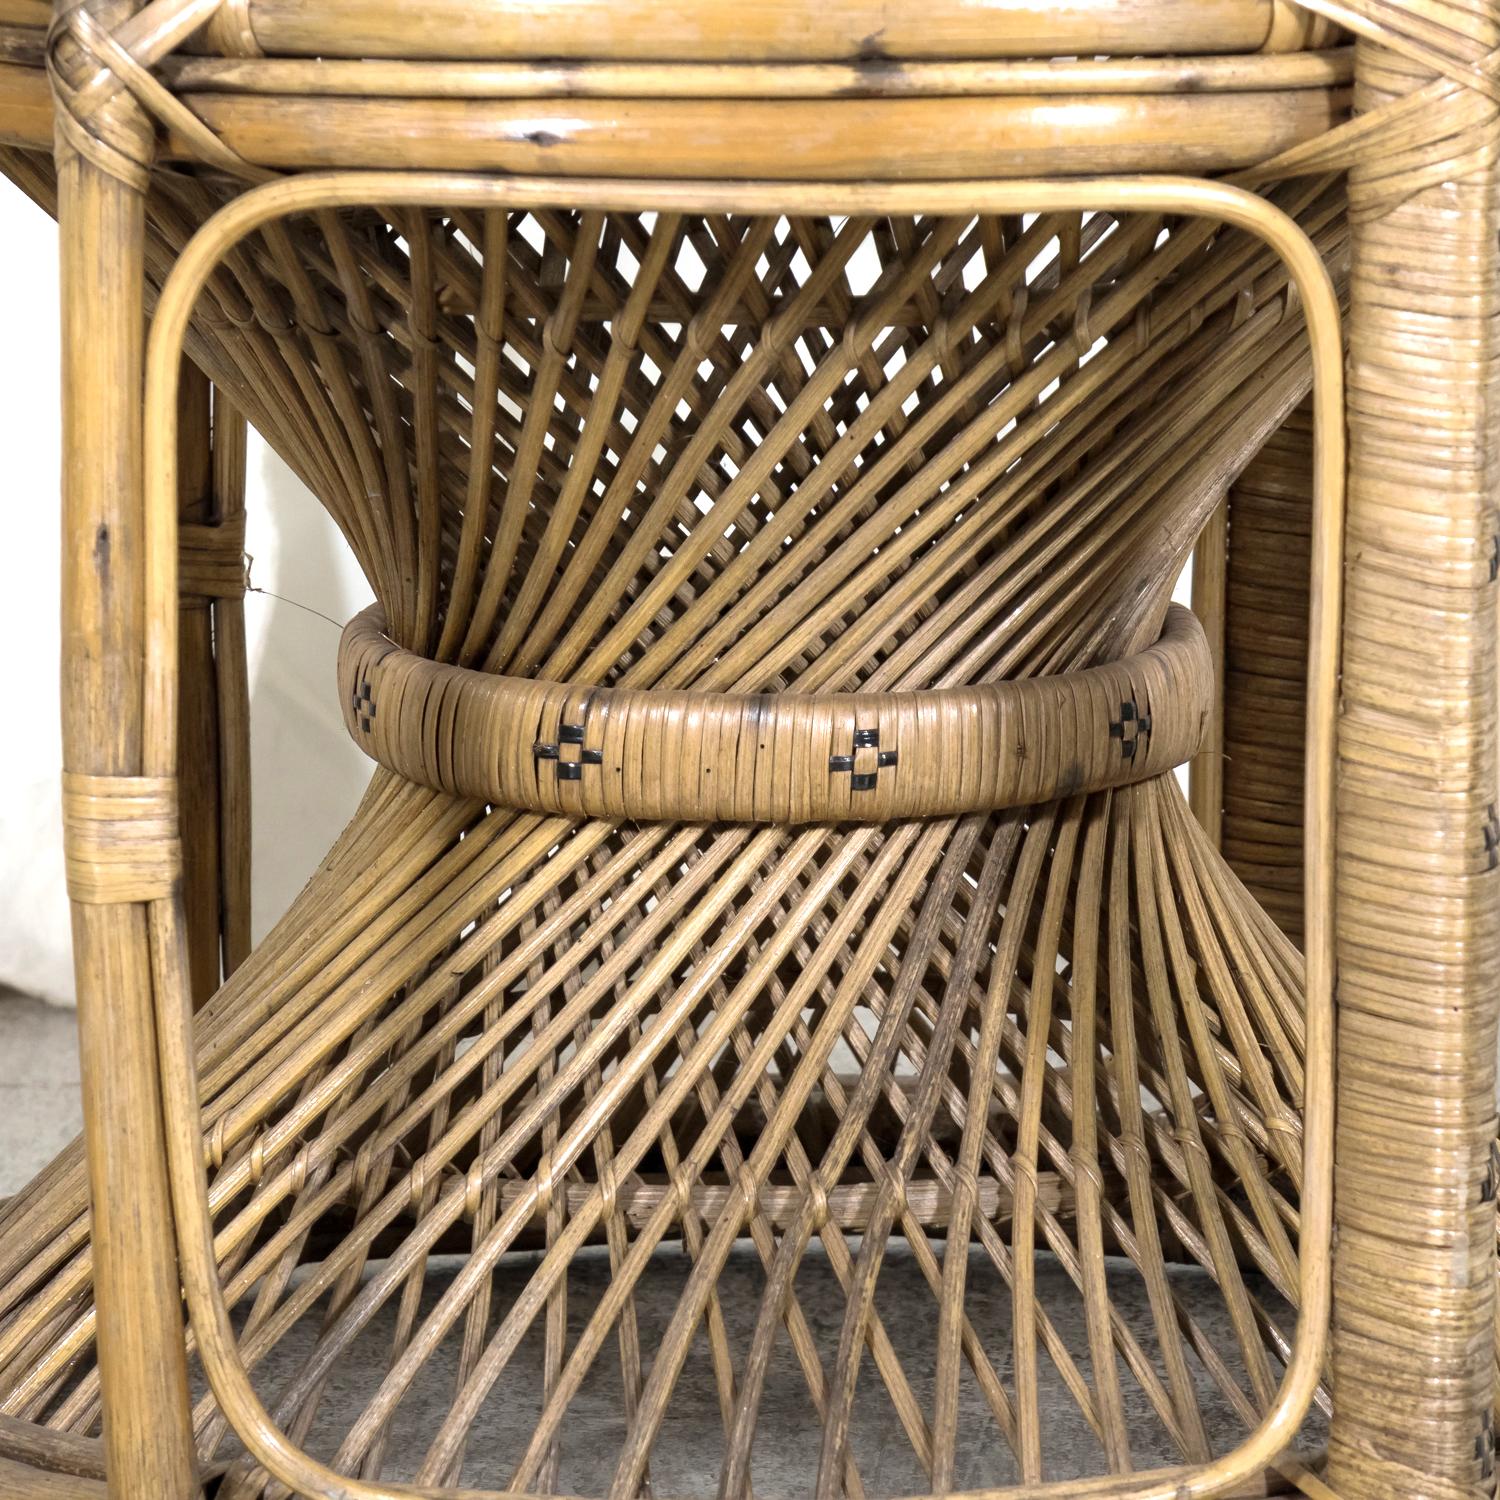 Rare 1930s French Wicker Rattan Emmanuelle Peacock Chair For Sale 12